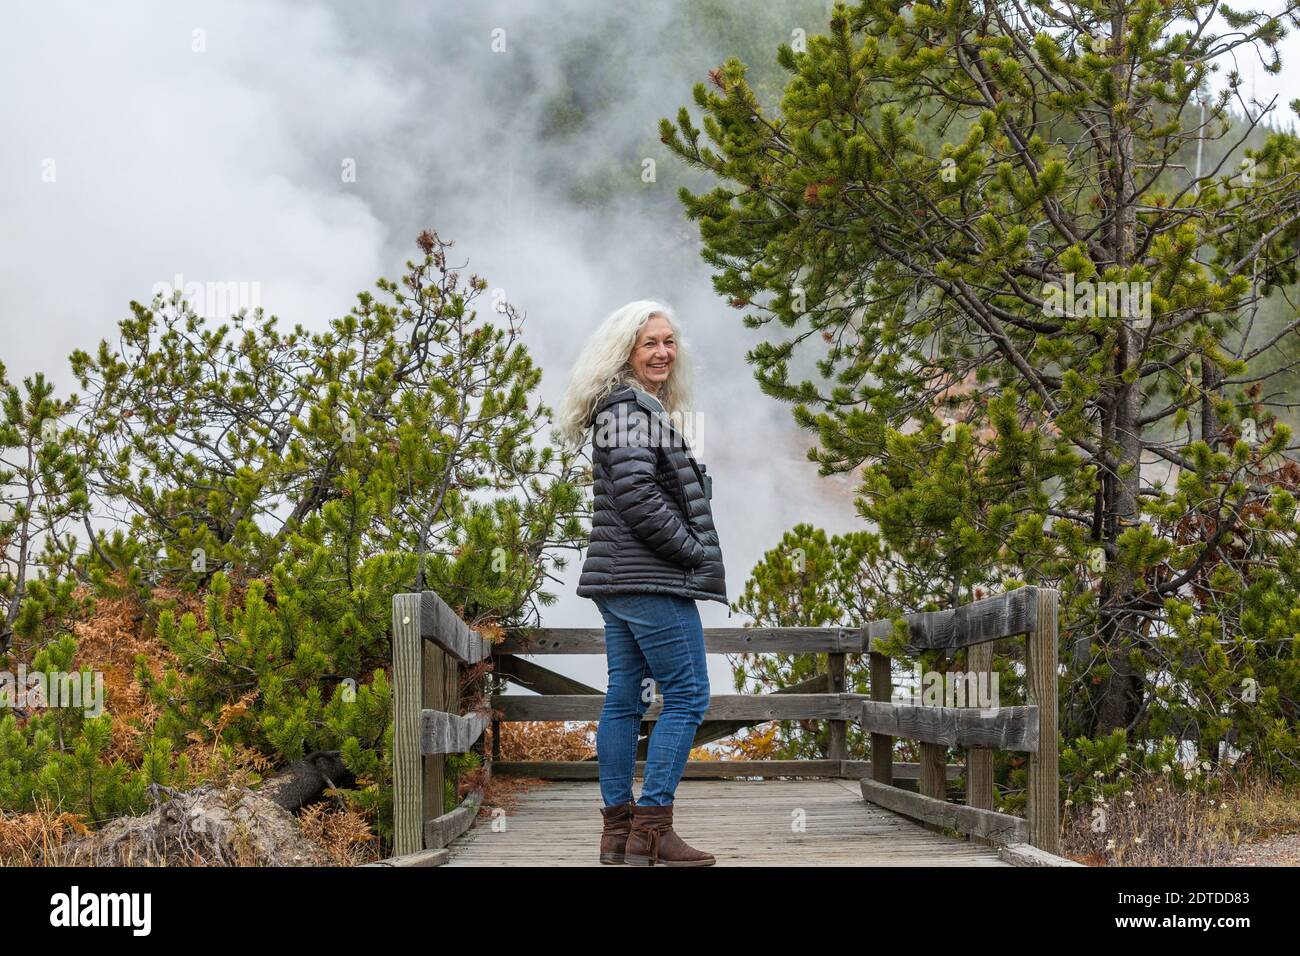 USA, Wyoming, Yellowstone National Park, Senior female tourist standing on wooden observation point in Yellowstone National Park Stock Photo